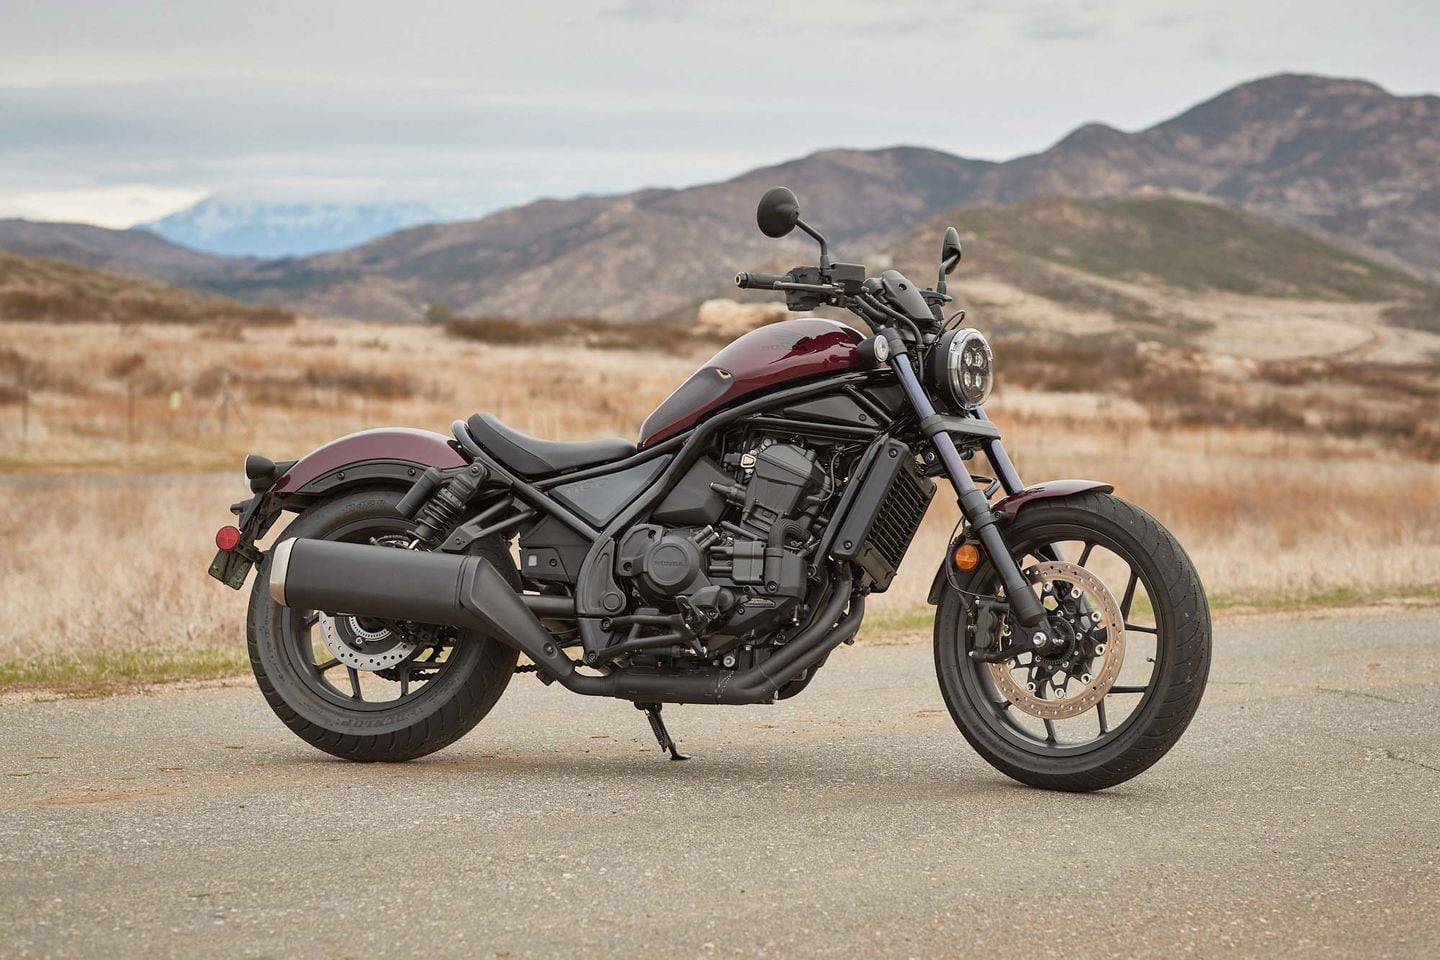 2021 Honda Rebel 1100 First Ride Review Cycle World